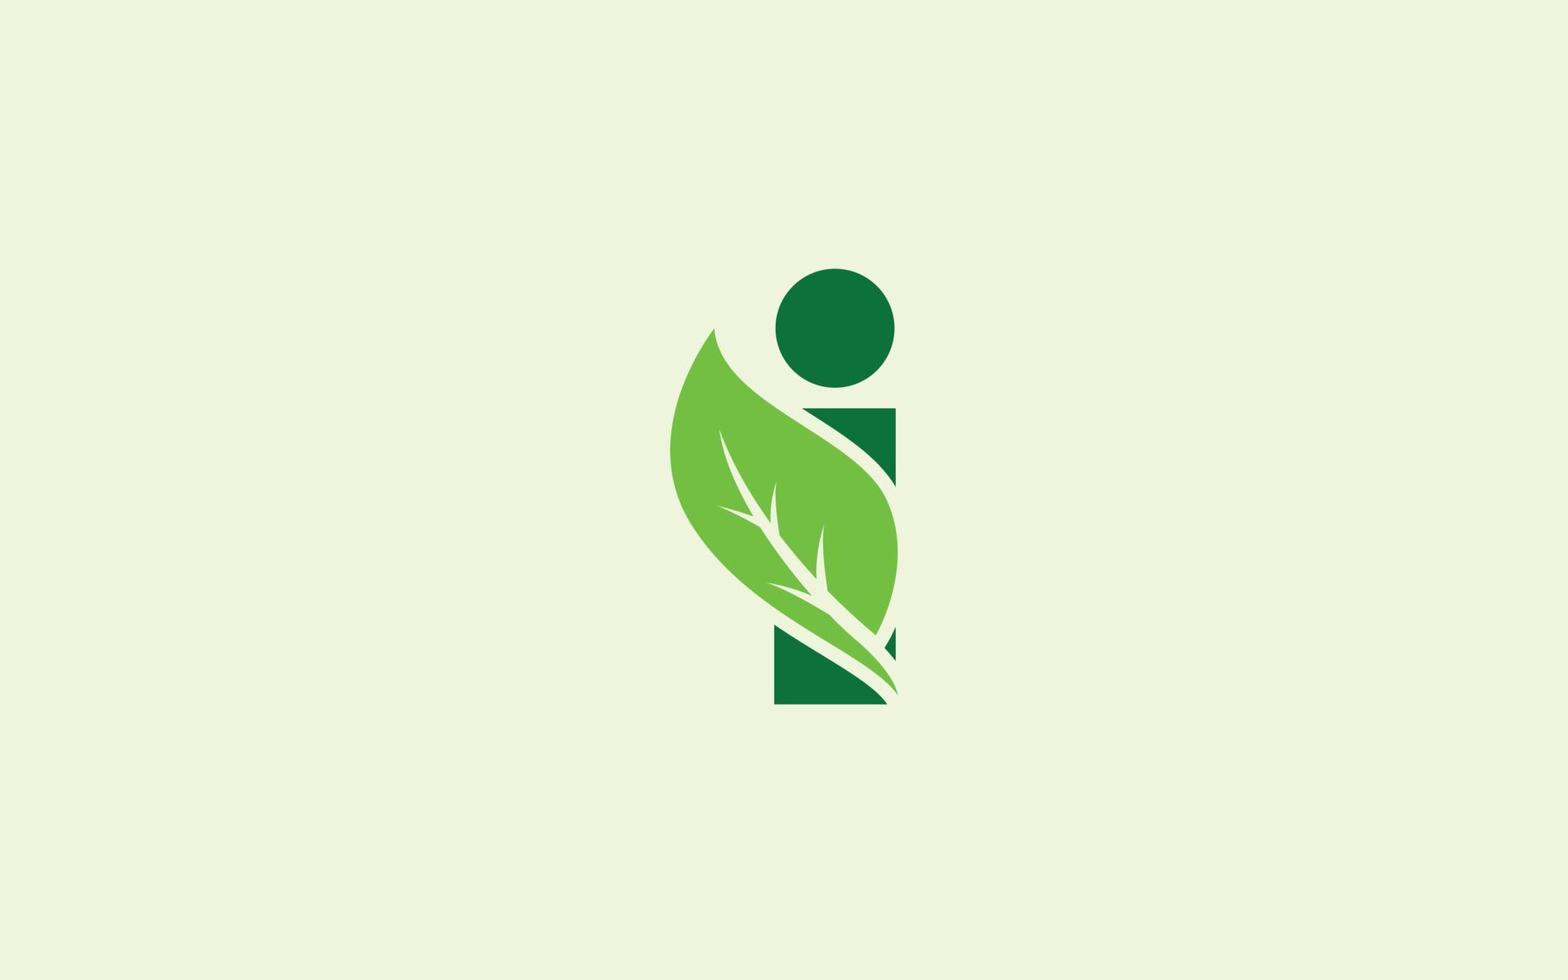 I logo leaf for identity. nature template vector illustration for your brand.